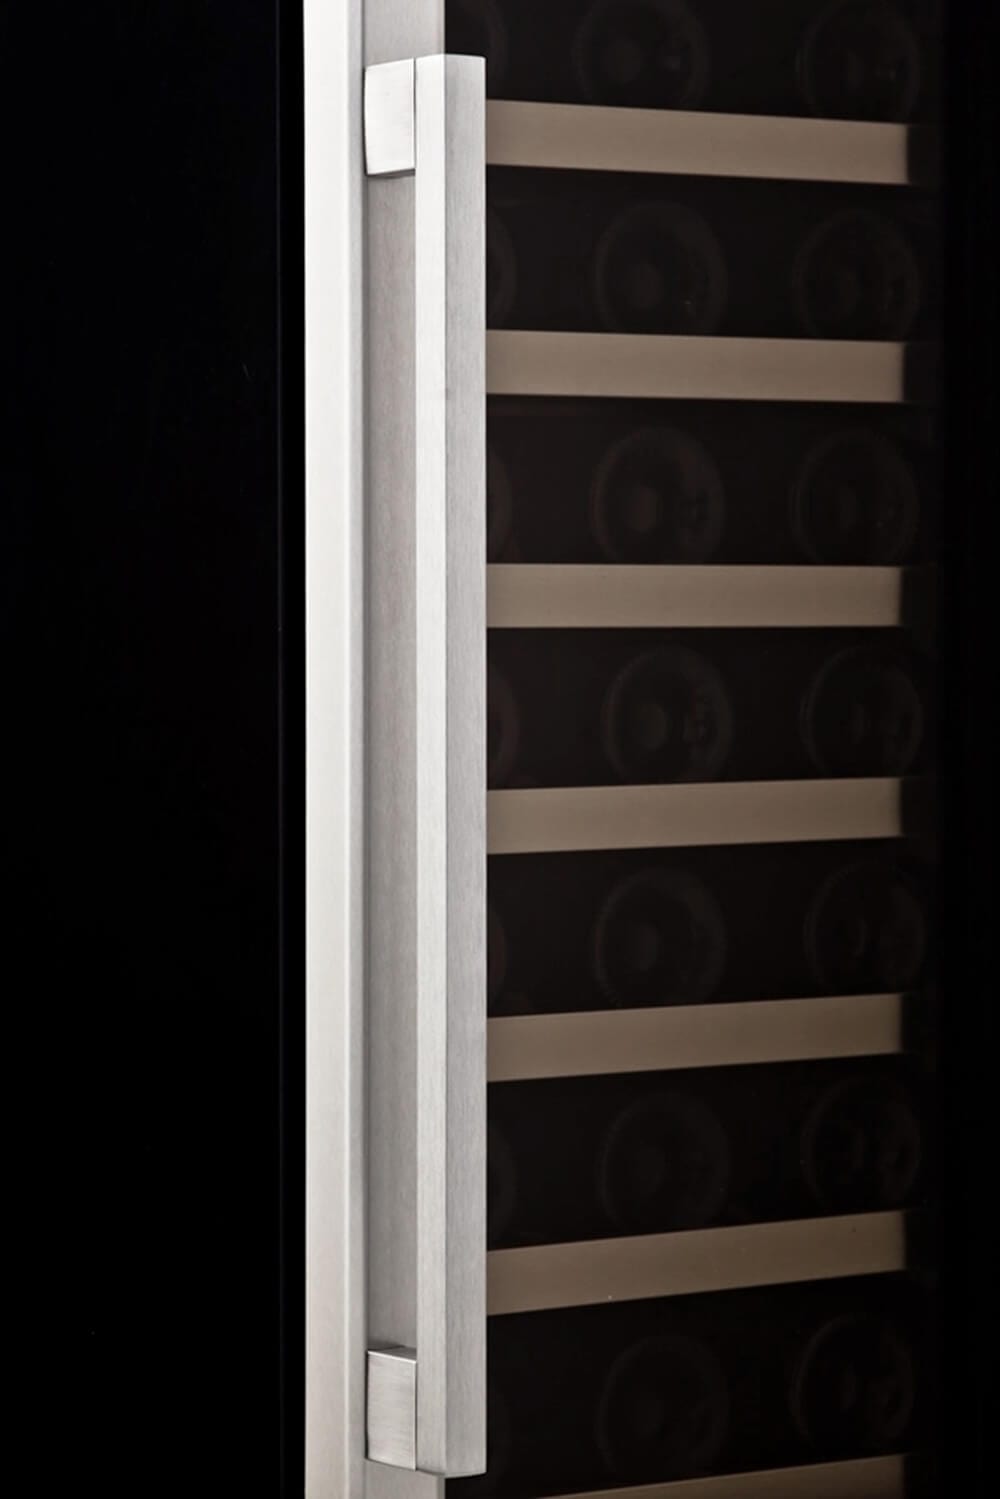 Whynter 33 Bottle Built-In Wine Refrigerator BWR-33SA Wine Coolers BWR-18SA Luxury Appliances Direct